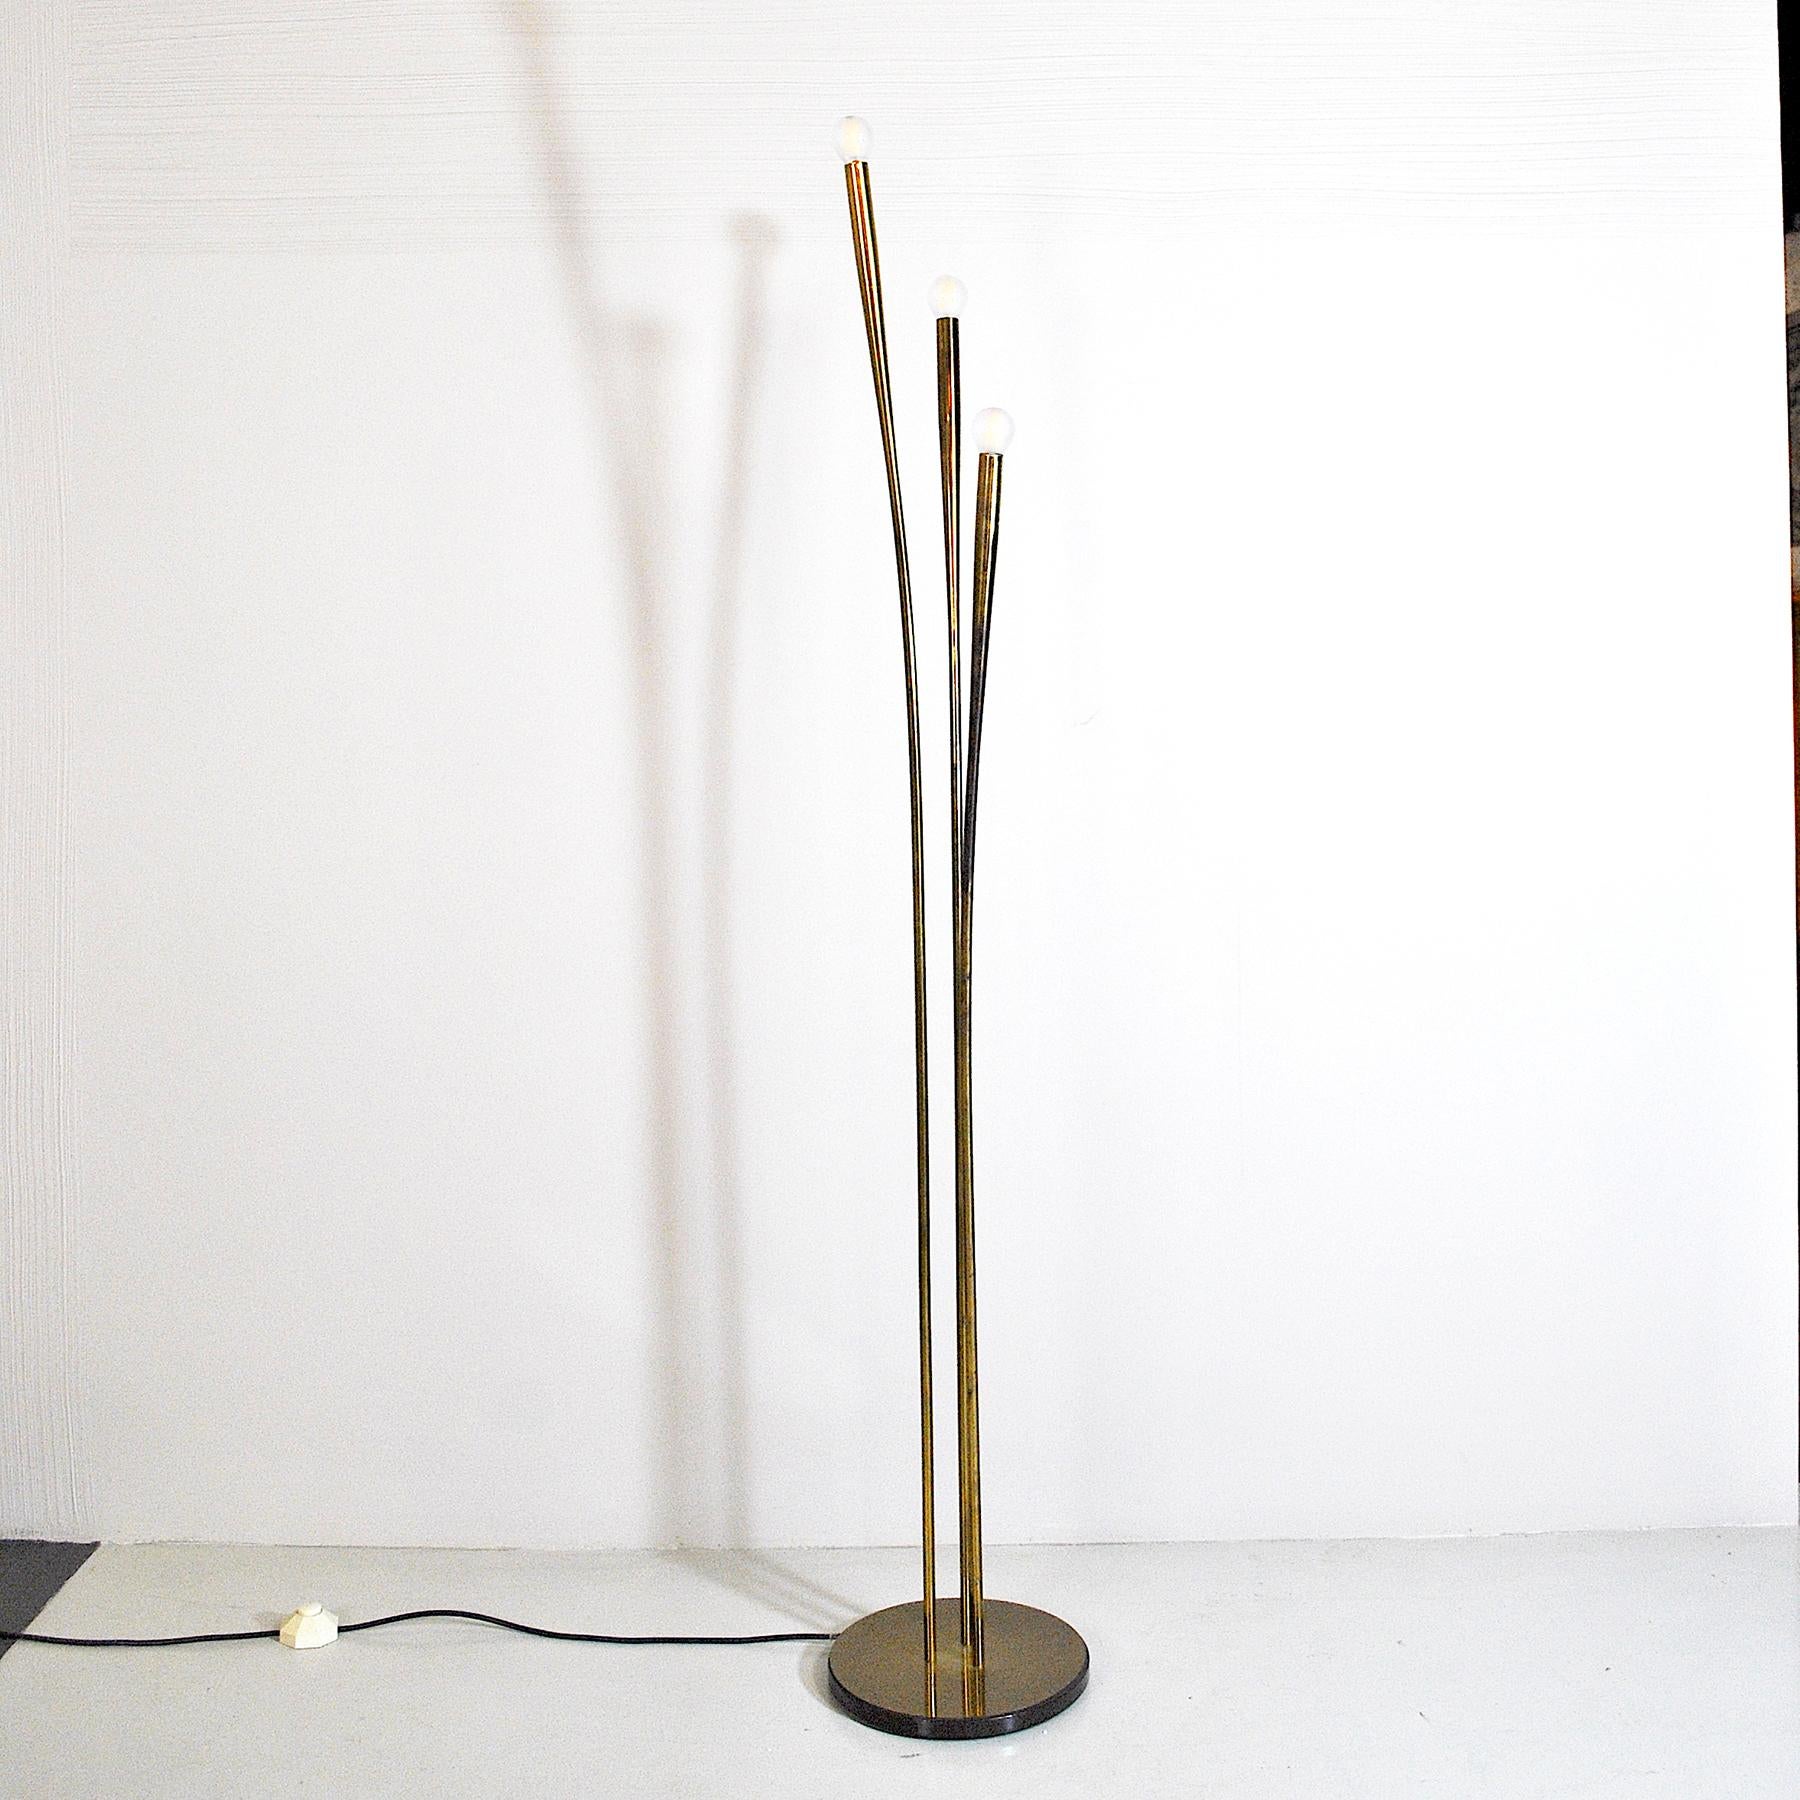 Floor lamp with circular base and three stems in the style of Oscar Torlasco from the 1950s.